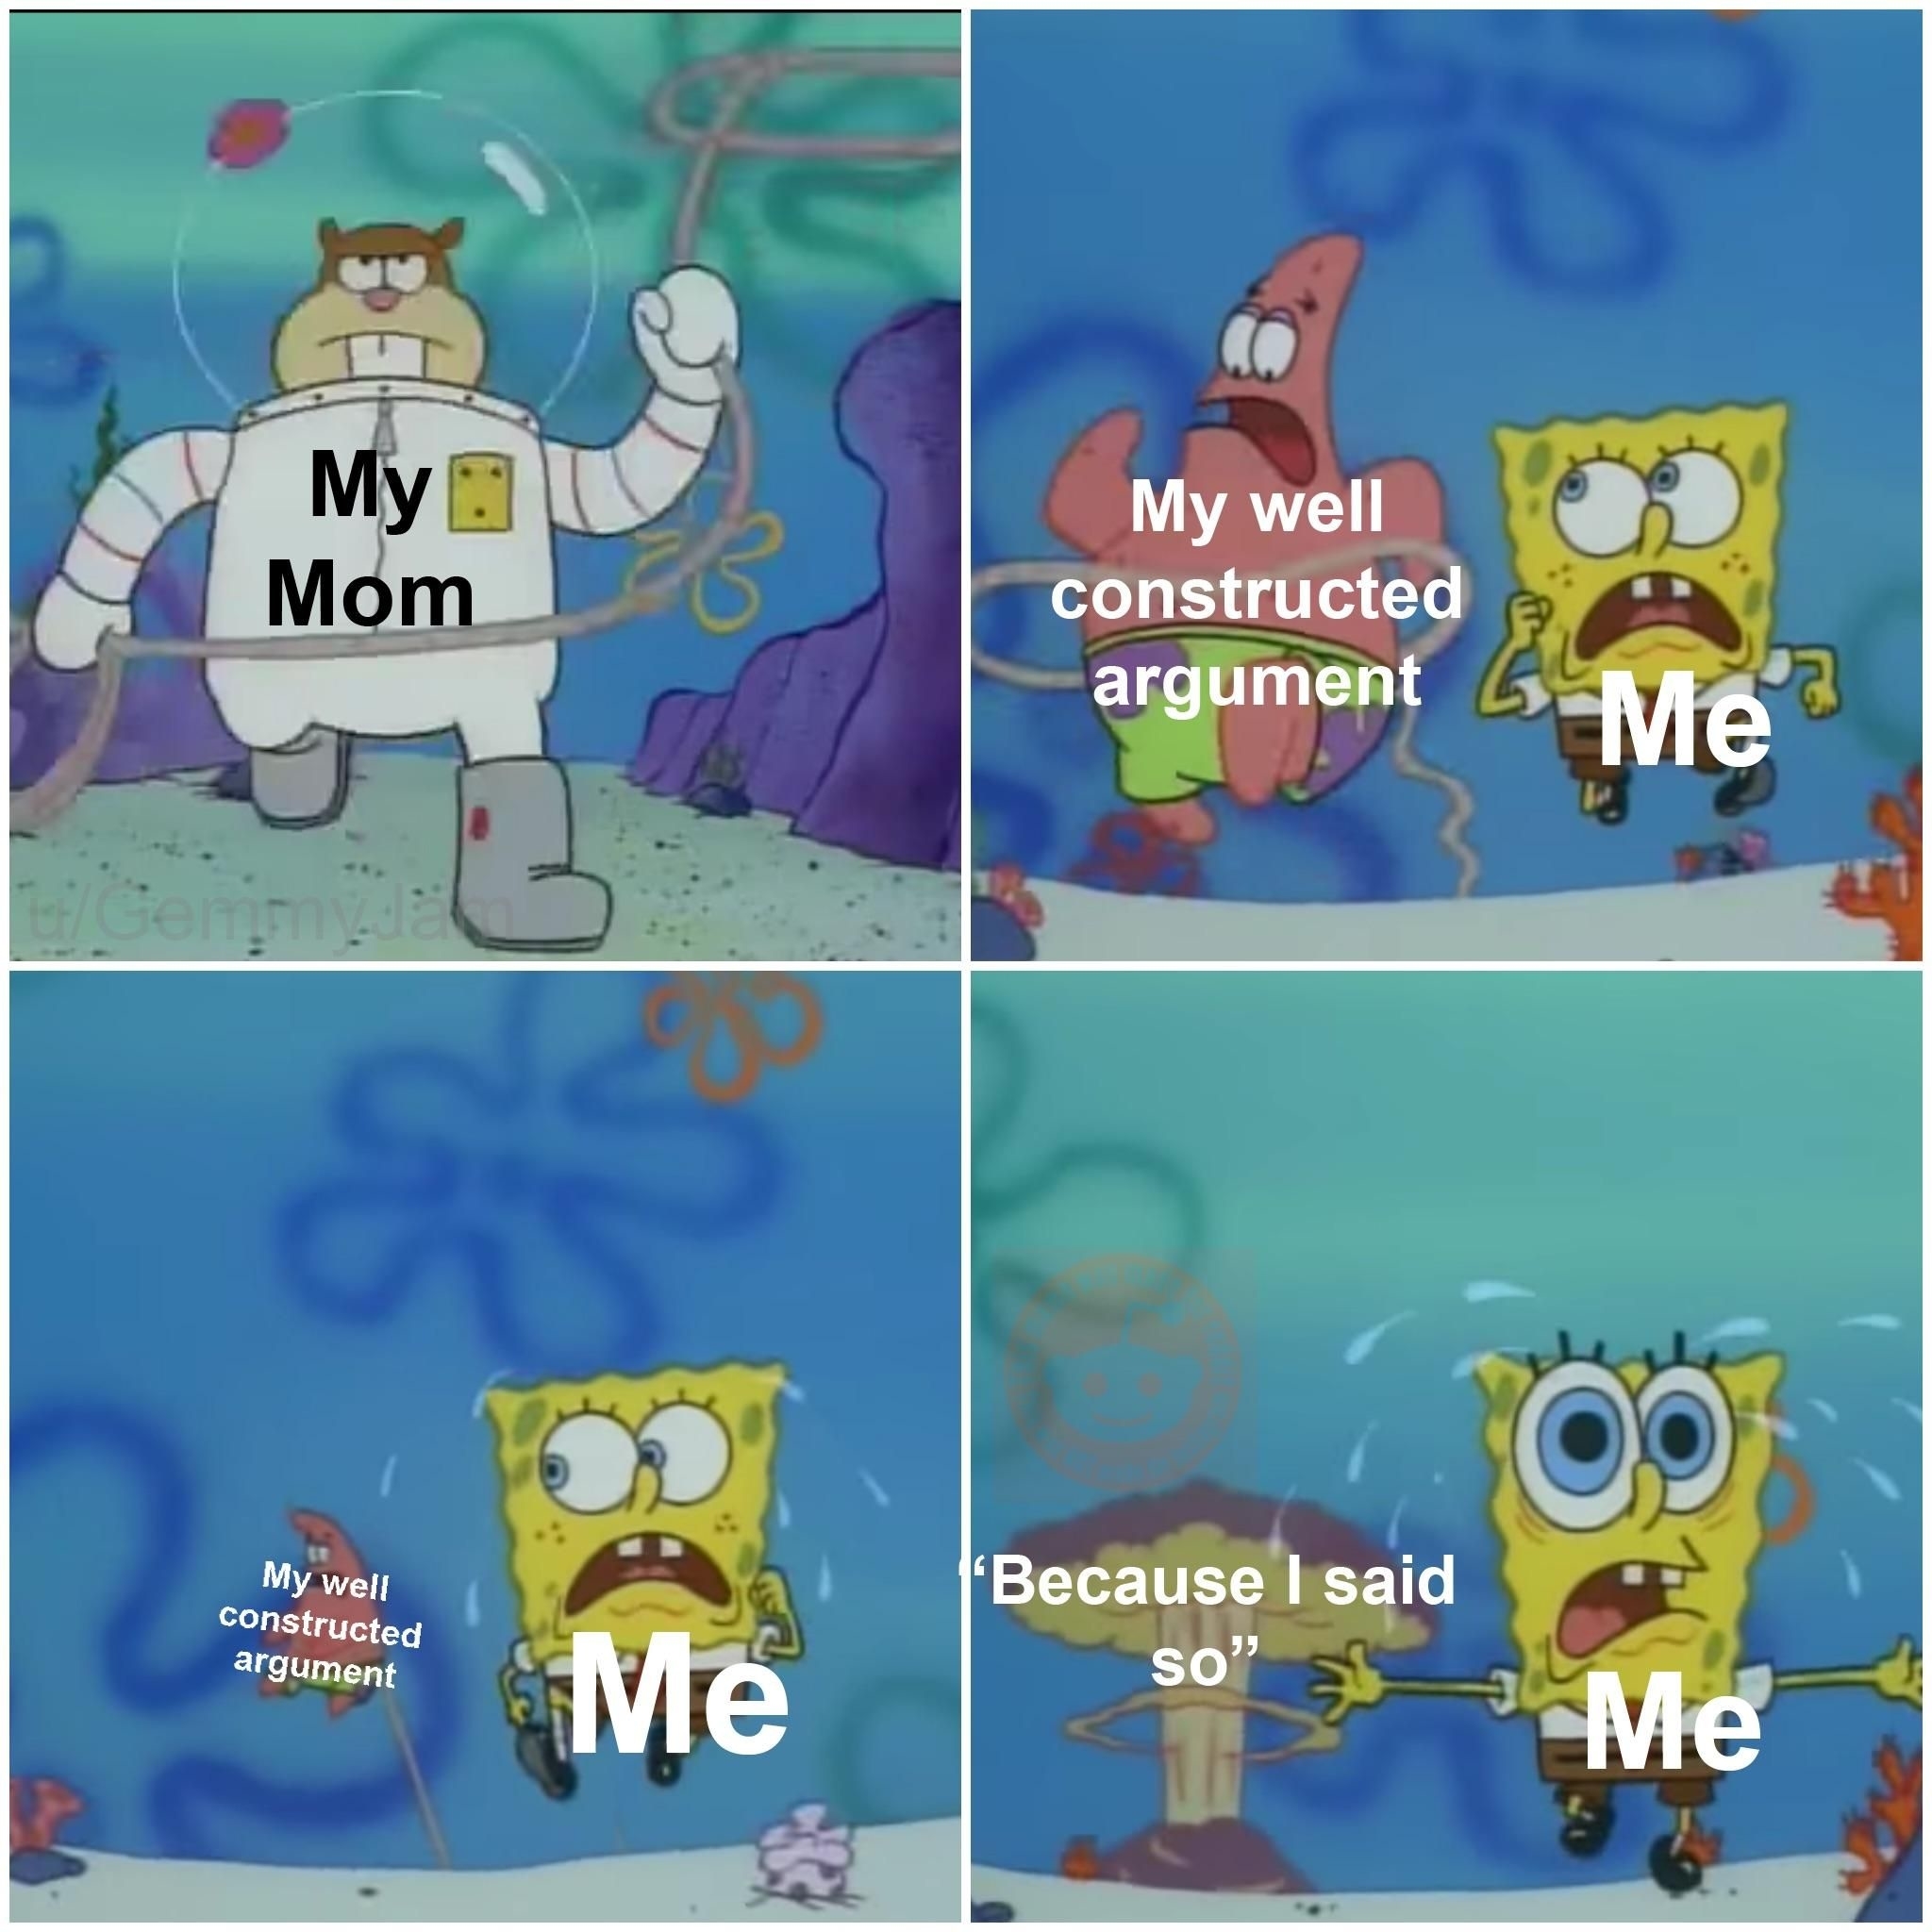 A four-panel meme featuring SpongeBob characters, contrasting a &#x27;mom&#x27;s authority&#x27; with &#x27;my argument&#x27;